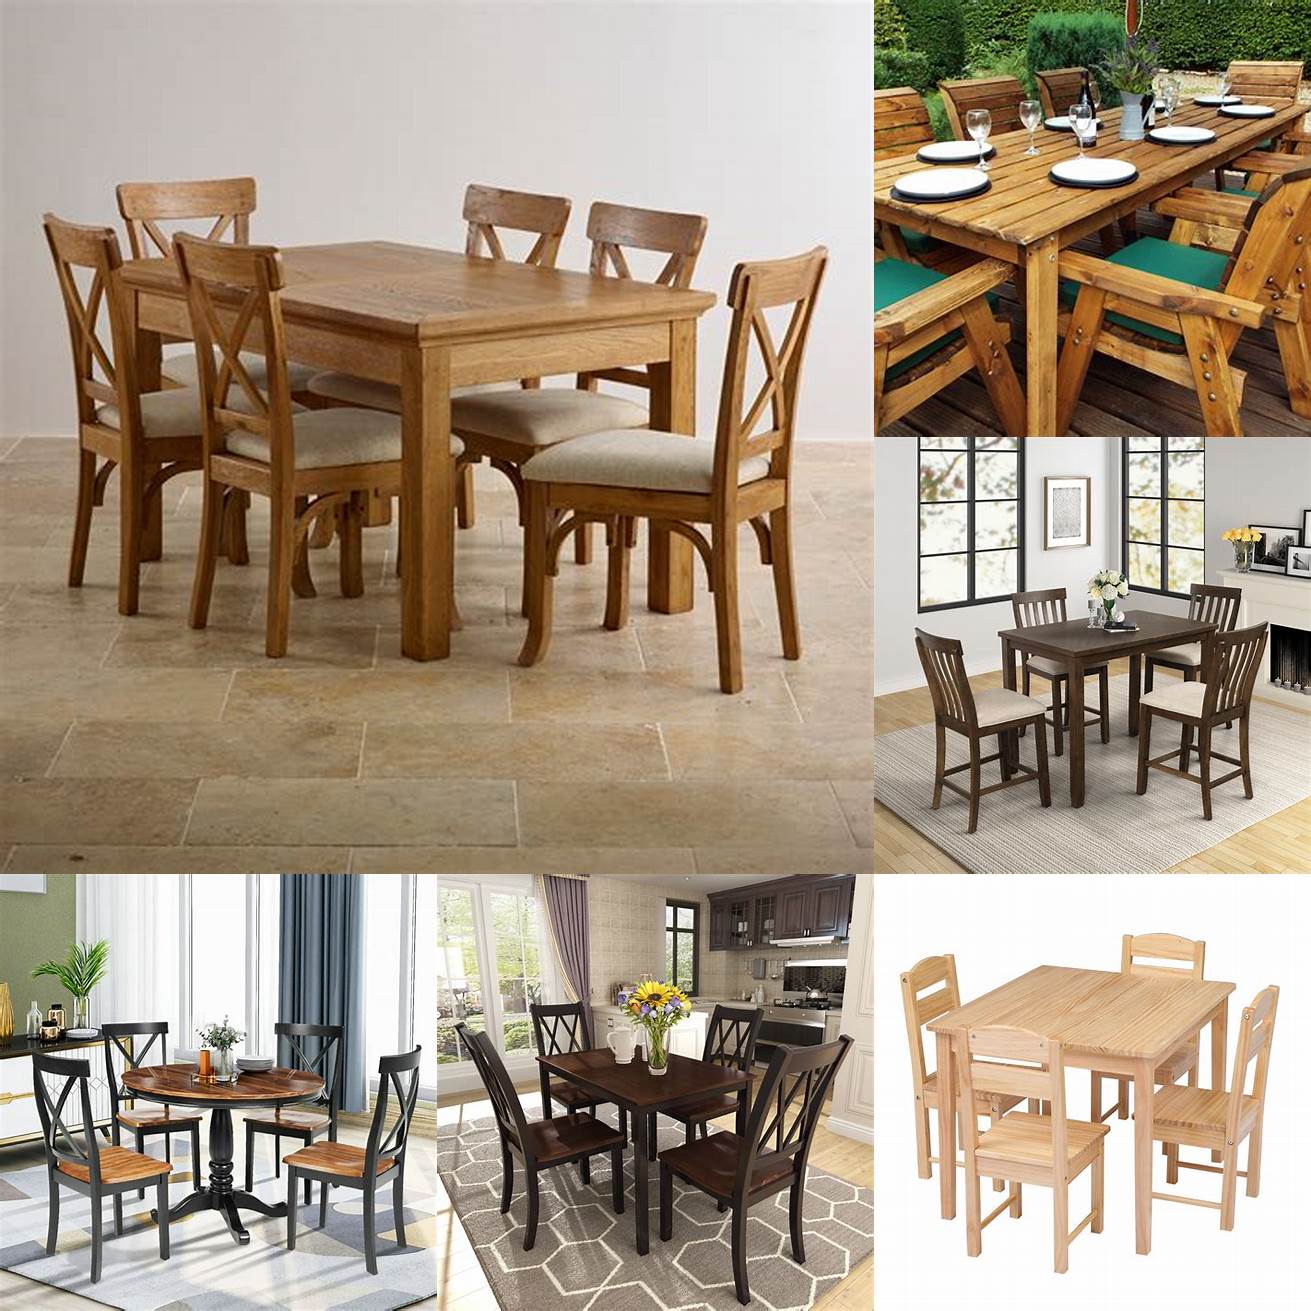 Wooden Chairs and Table